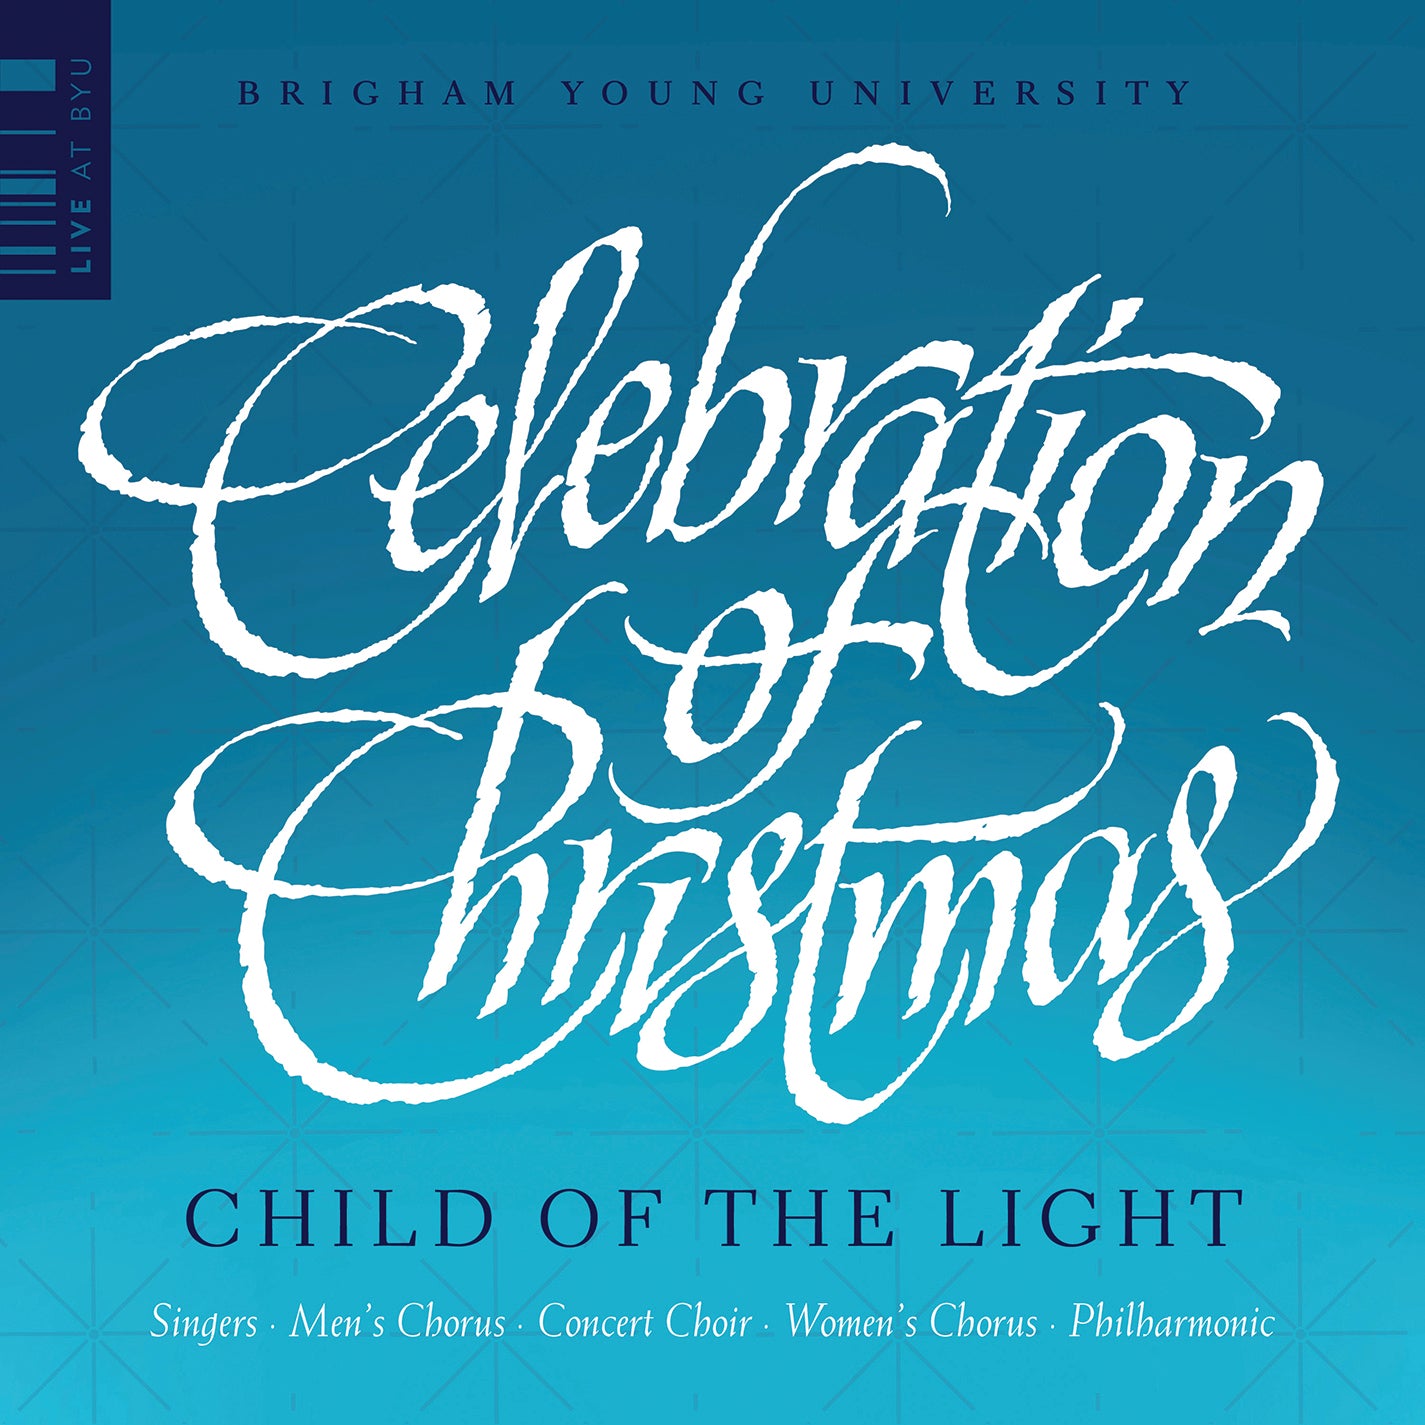 Celebration of Christmas - Child of the Light / Ensembles of Brigham Young University